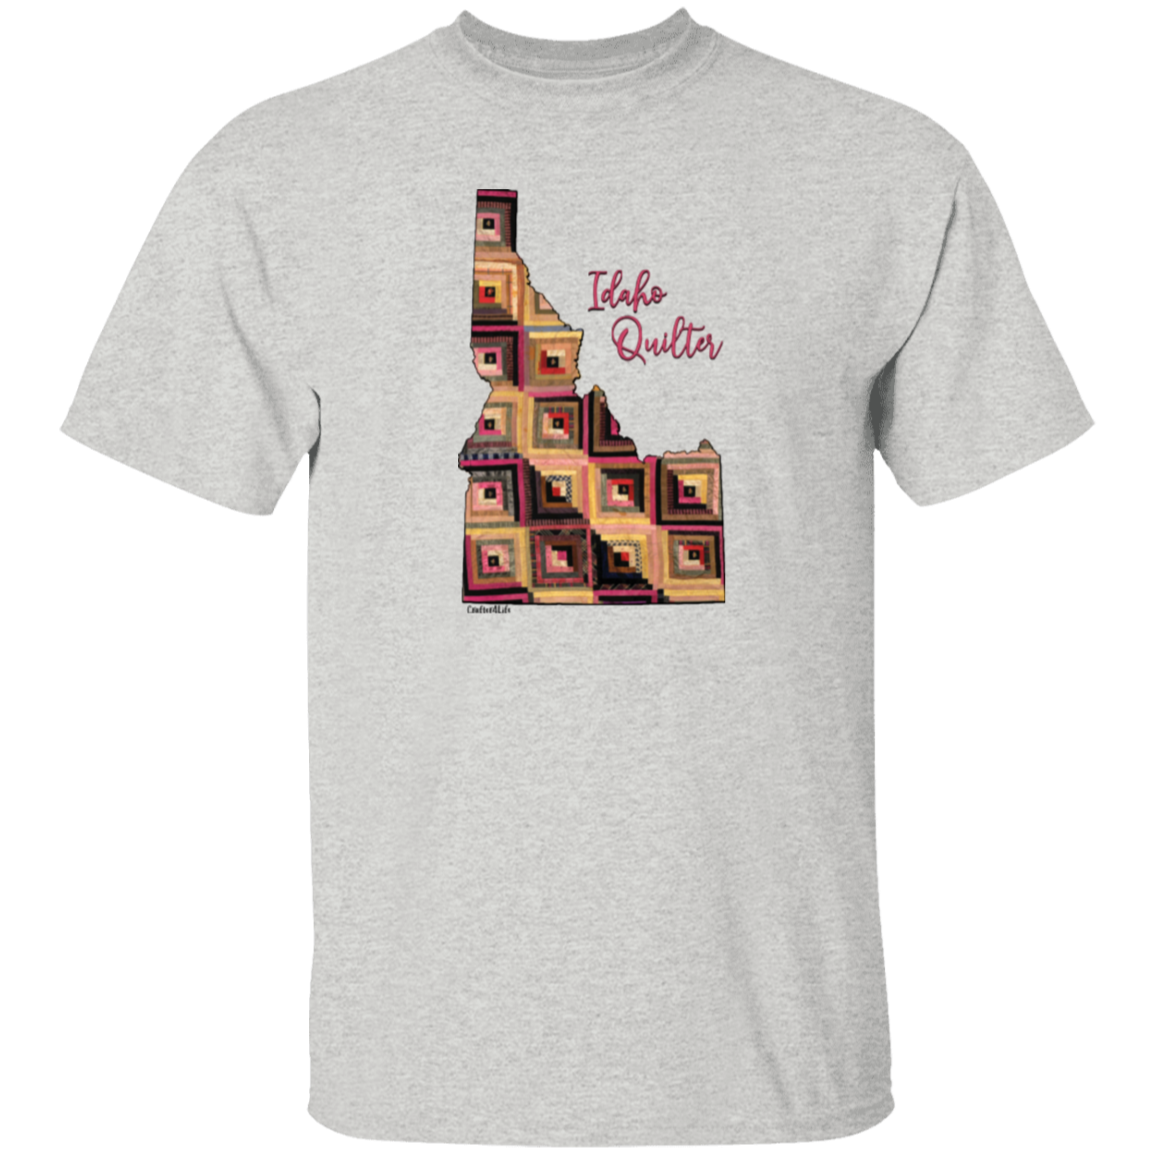 Idaho Quilter T-Shirt, Gift for Quilting Friends and Family